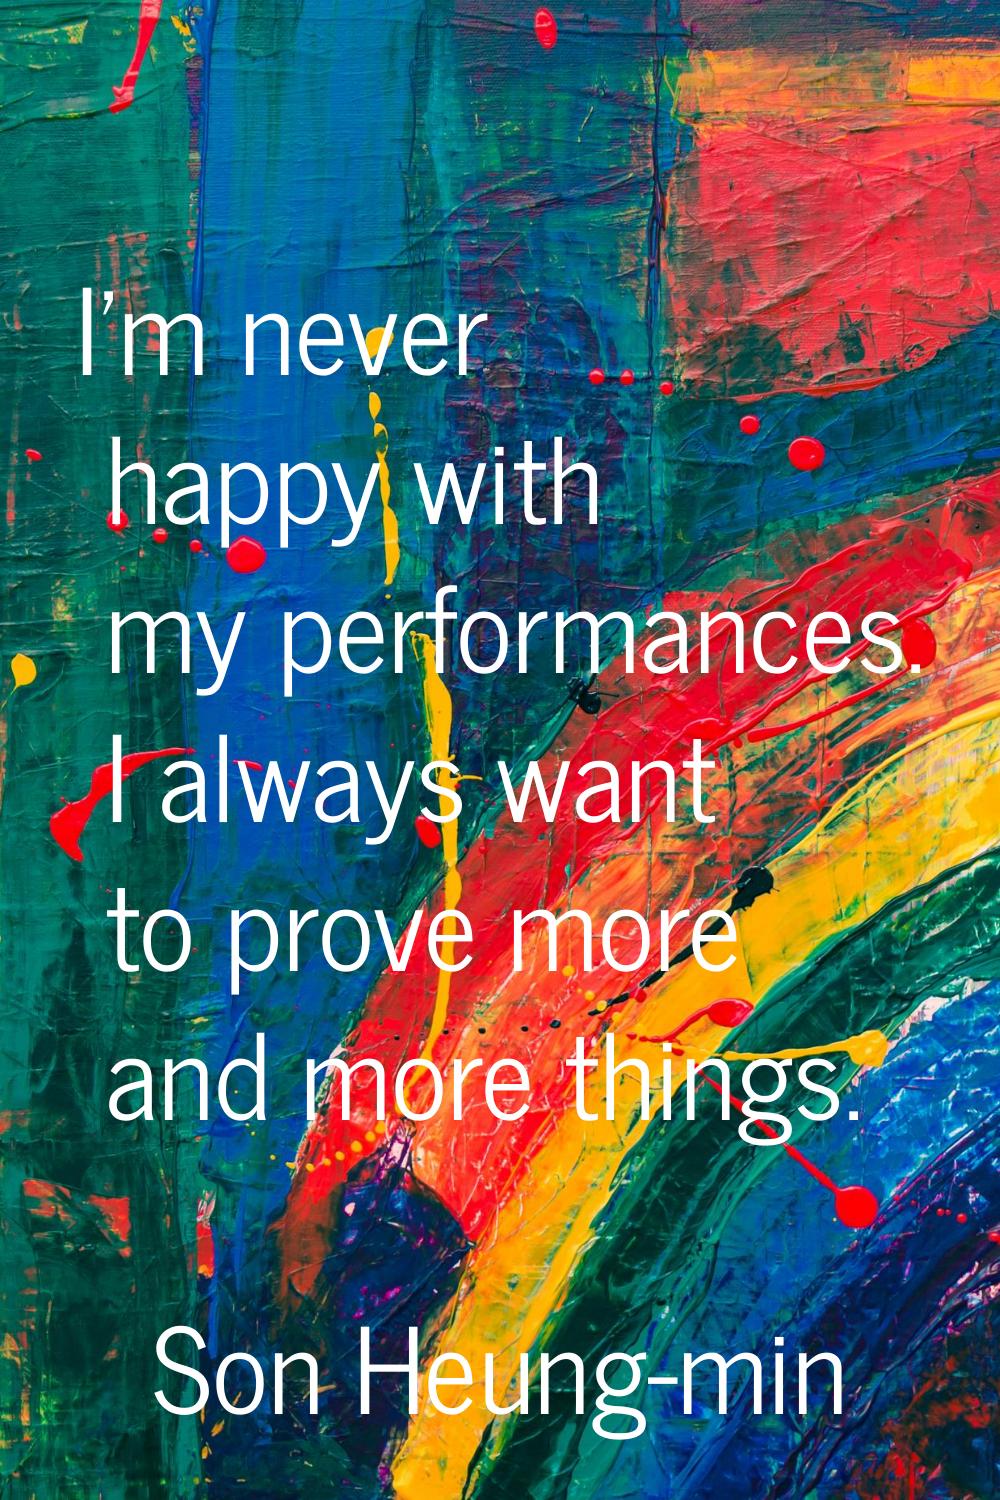 I'm never happy with my performances. I always want to prove more and more things.